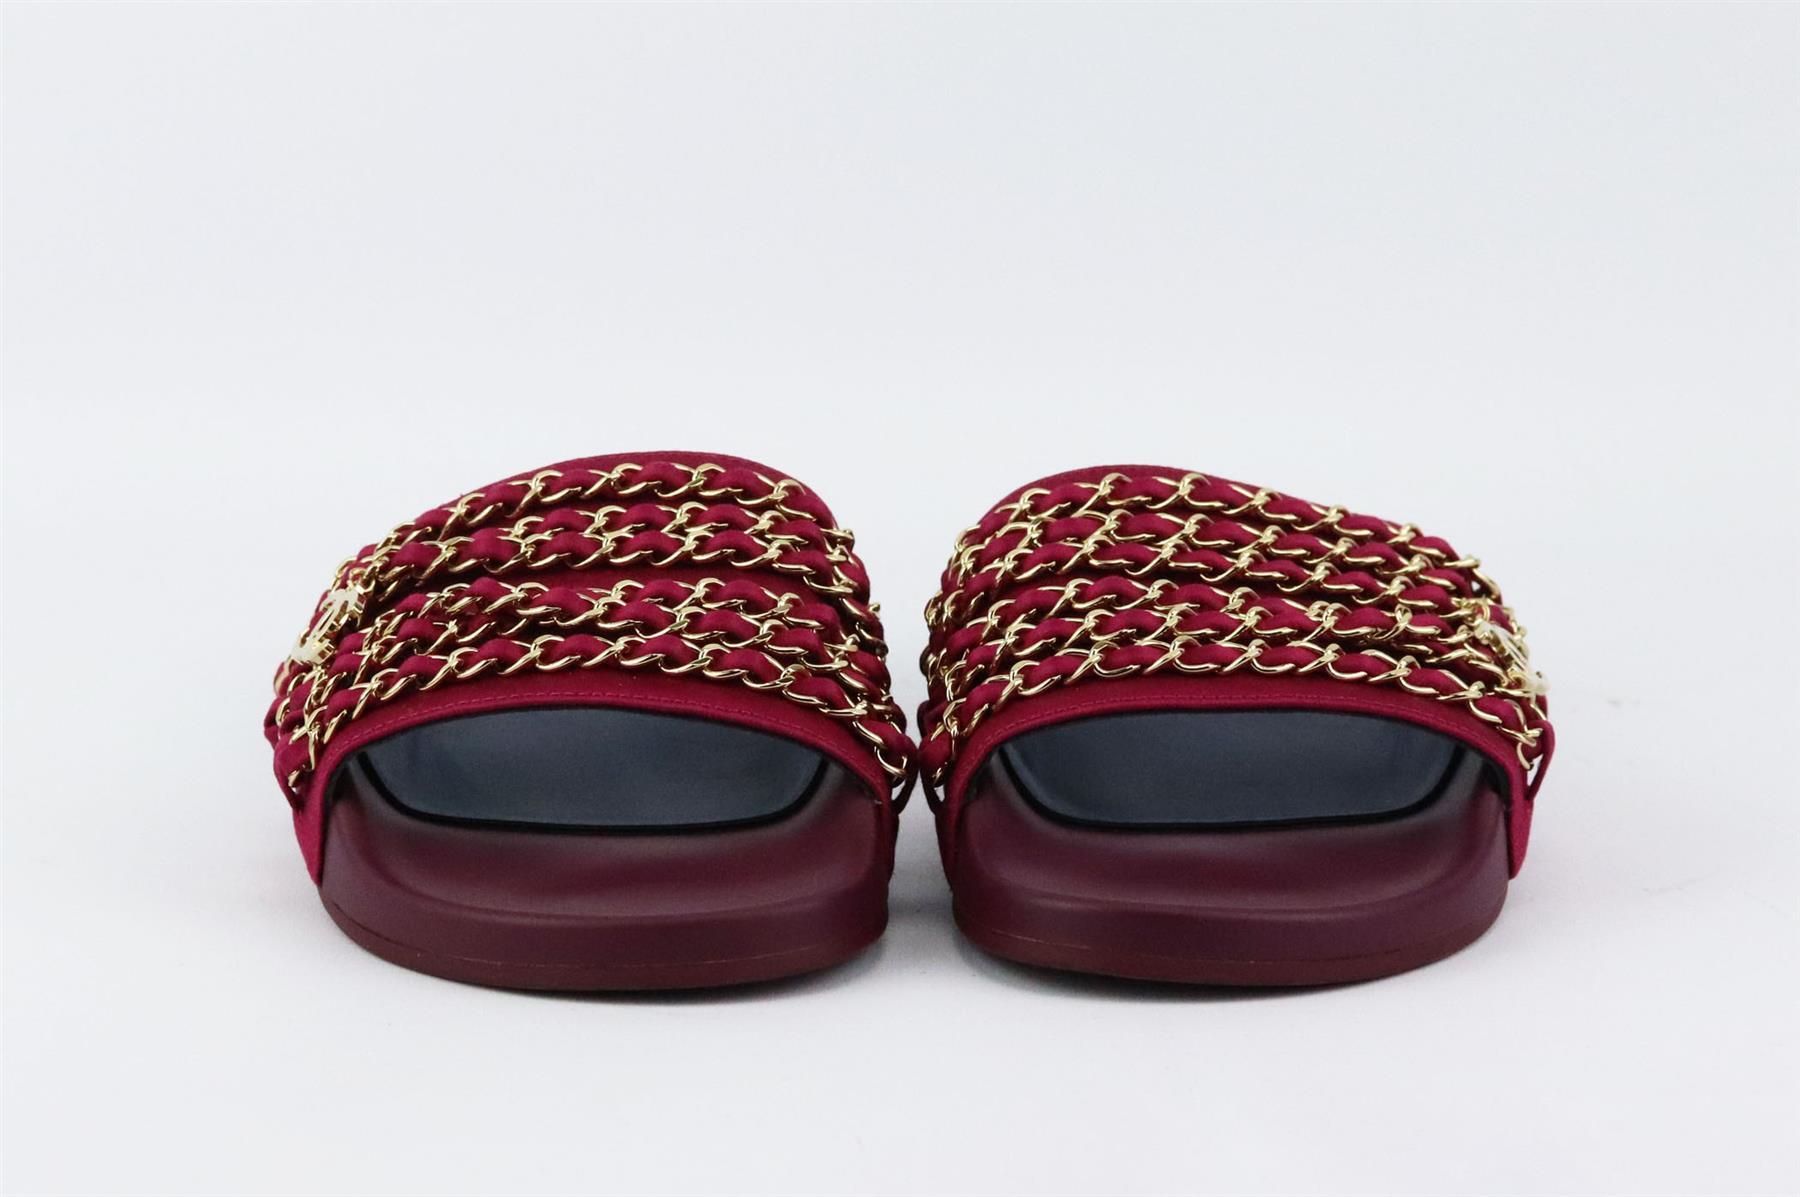 Chanel may specialize in luxurious bags, but the brand also designs great pieces, these slides are made from rich red CC detailed gold-tone chain trimmed satin and has a contoured rubber footbed with gripped soles for comfort and grip. Sole measures